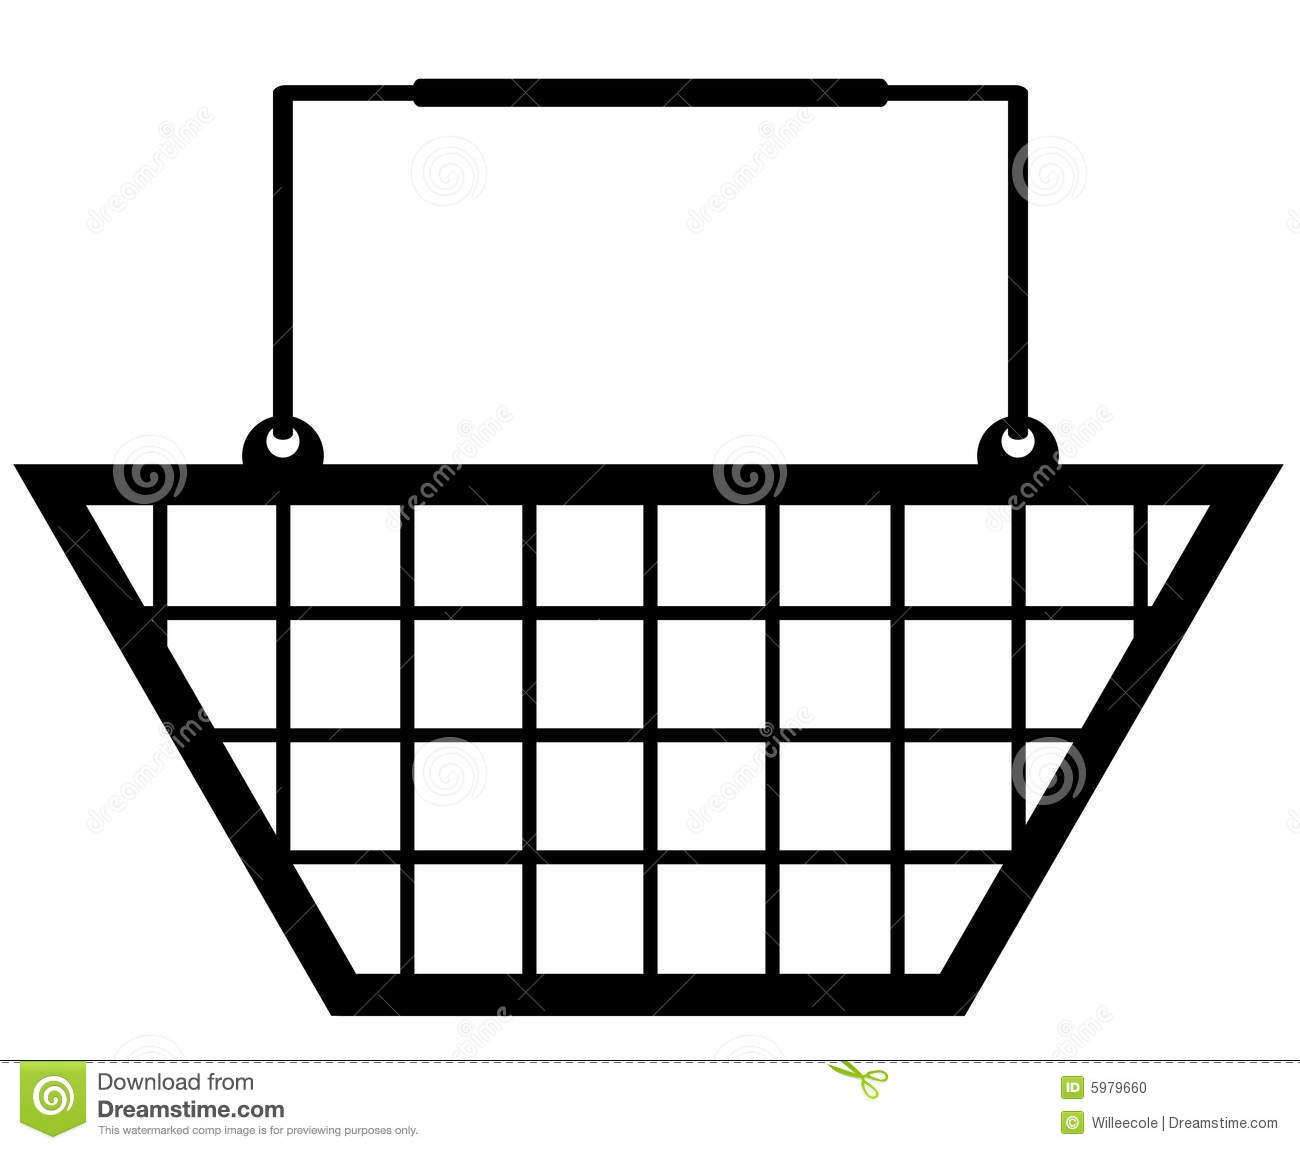 Grocery Basket Clipart Displaying 18 Images For Grocery Basket Clipart